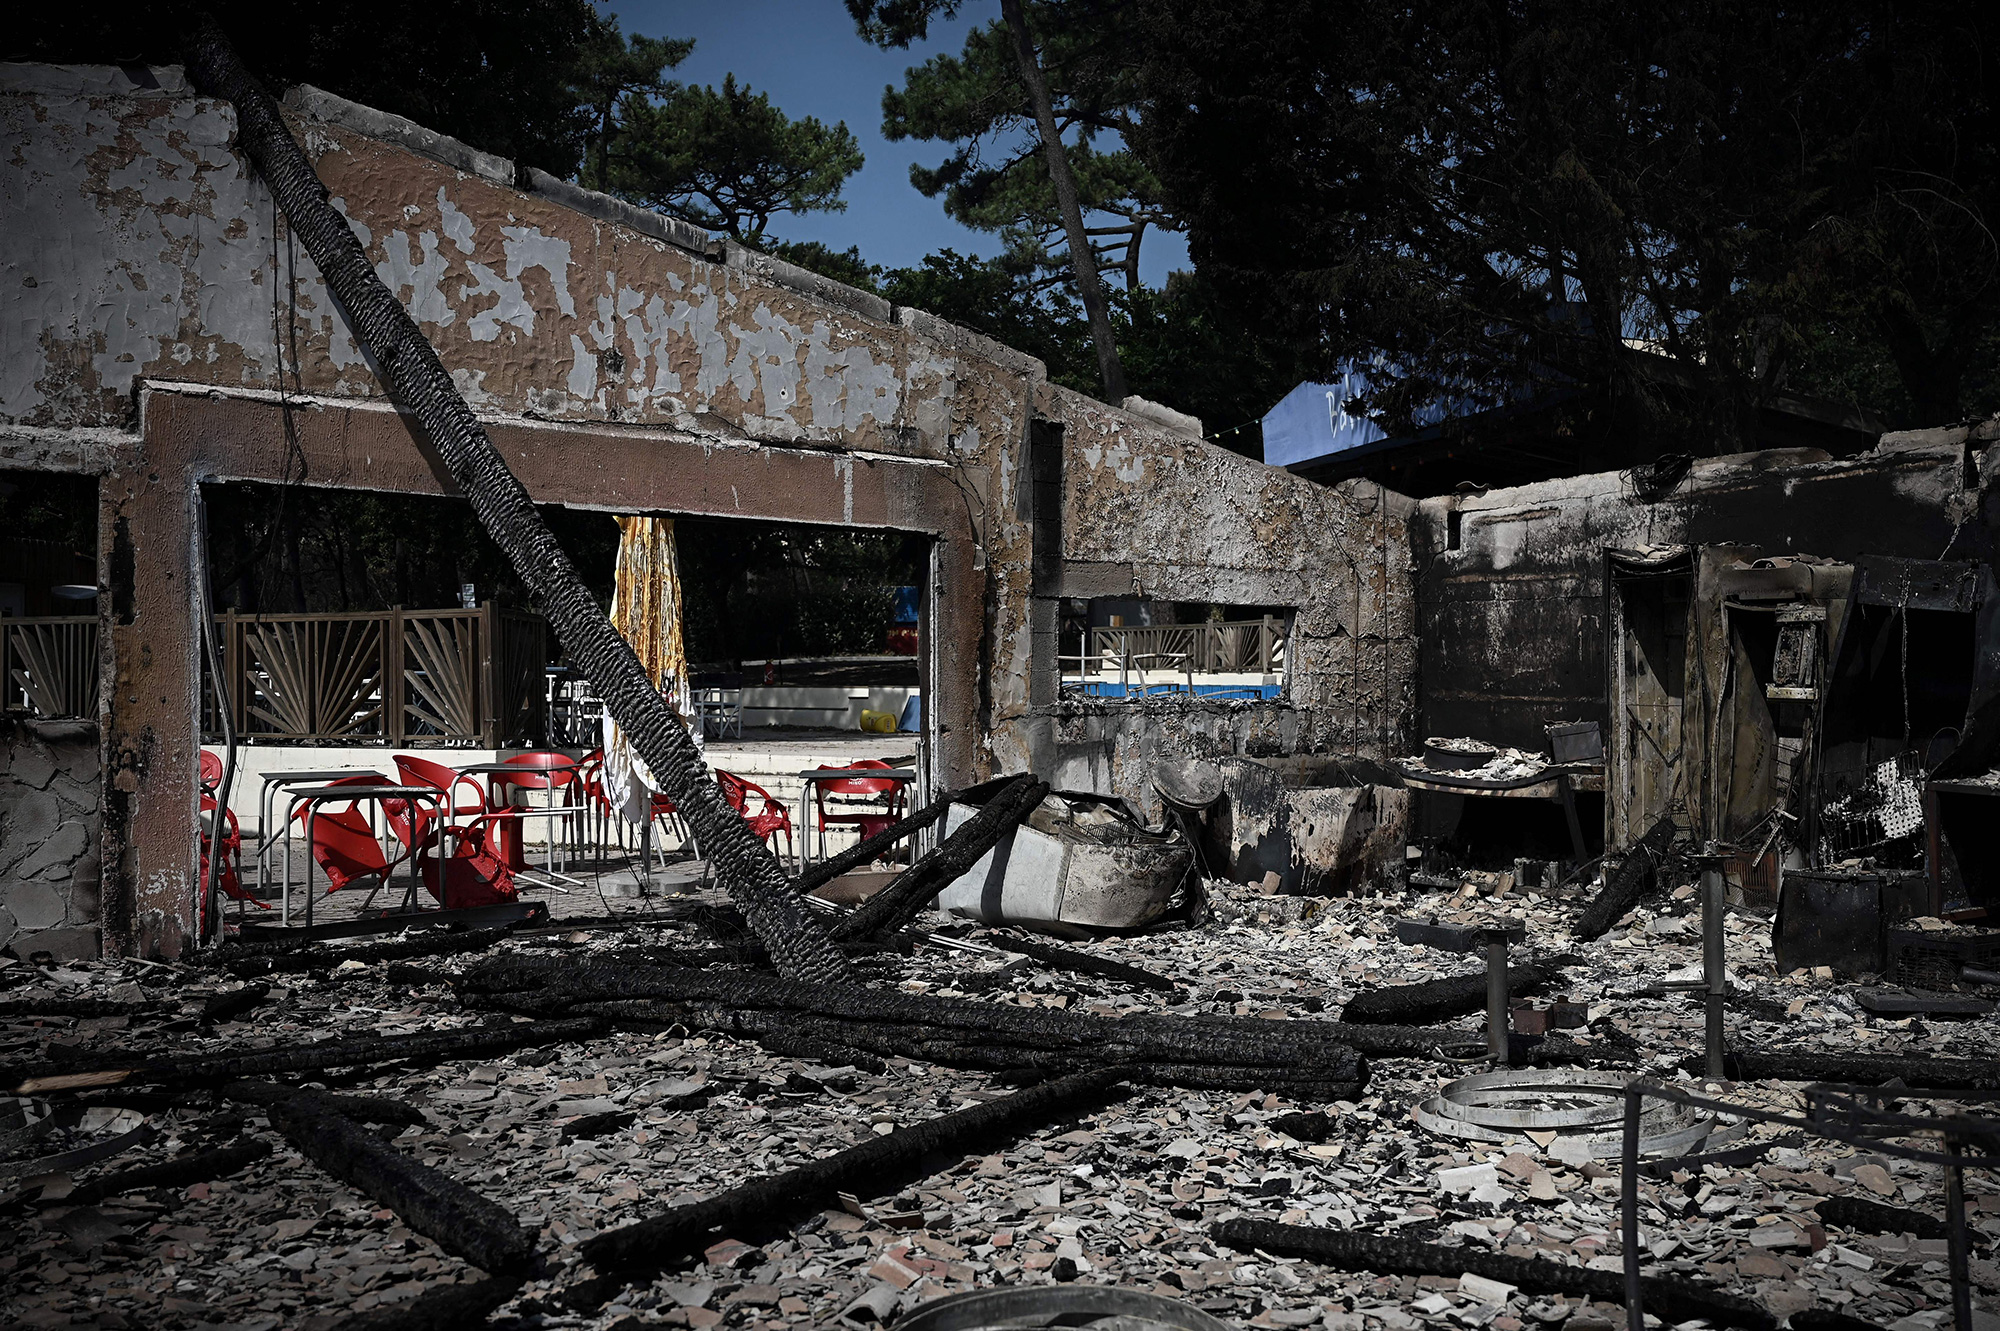 Damage at "Les Flots Bleus" camping on Tuesday, July 19, which has been ravaged by a wildfire in Pyla sur Mer in Gironde, located in southwestern France. 